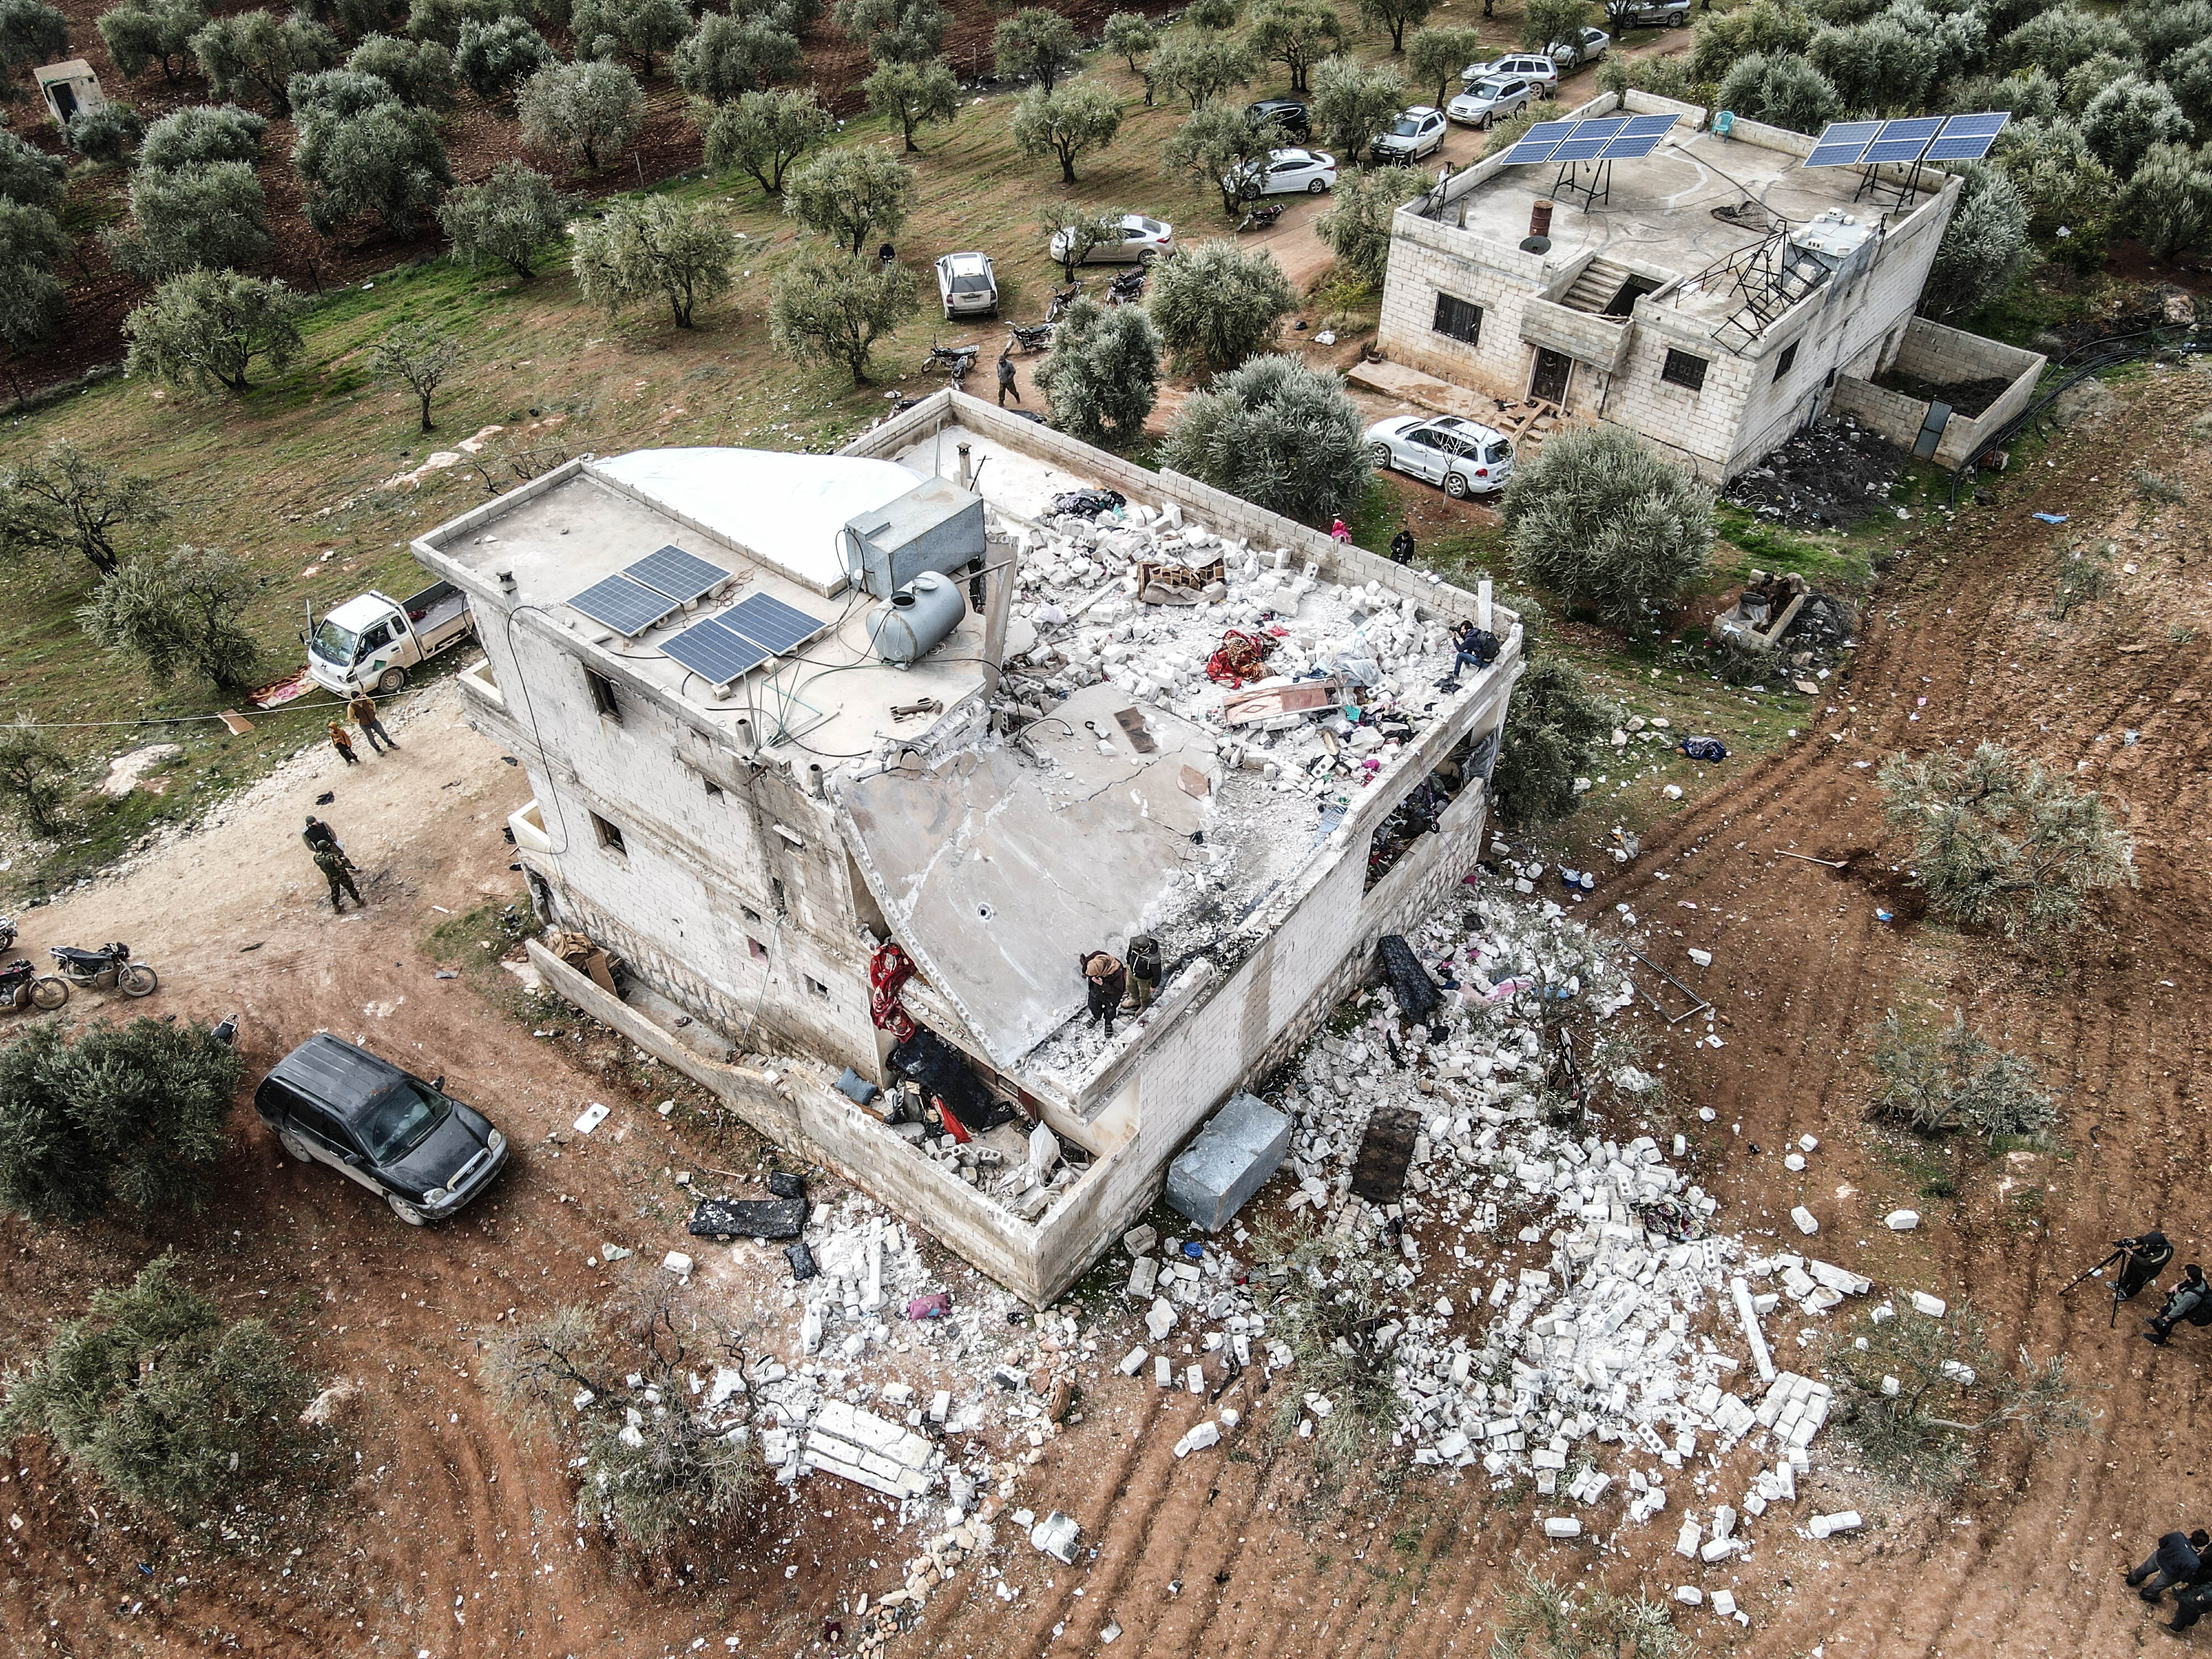 An aerial view of wreckage around the site after an operation carried out by US forces on February 3 in Idlib, Syria.